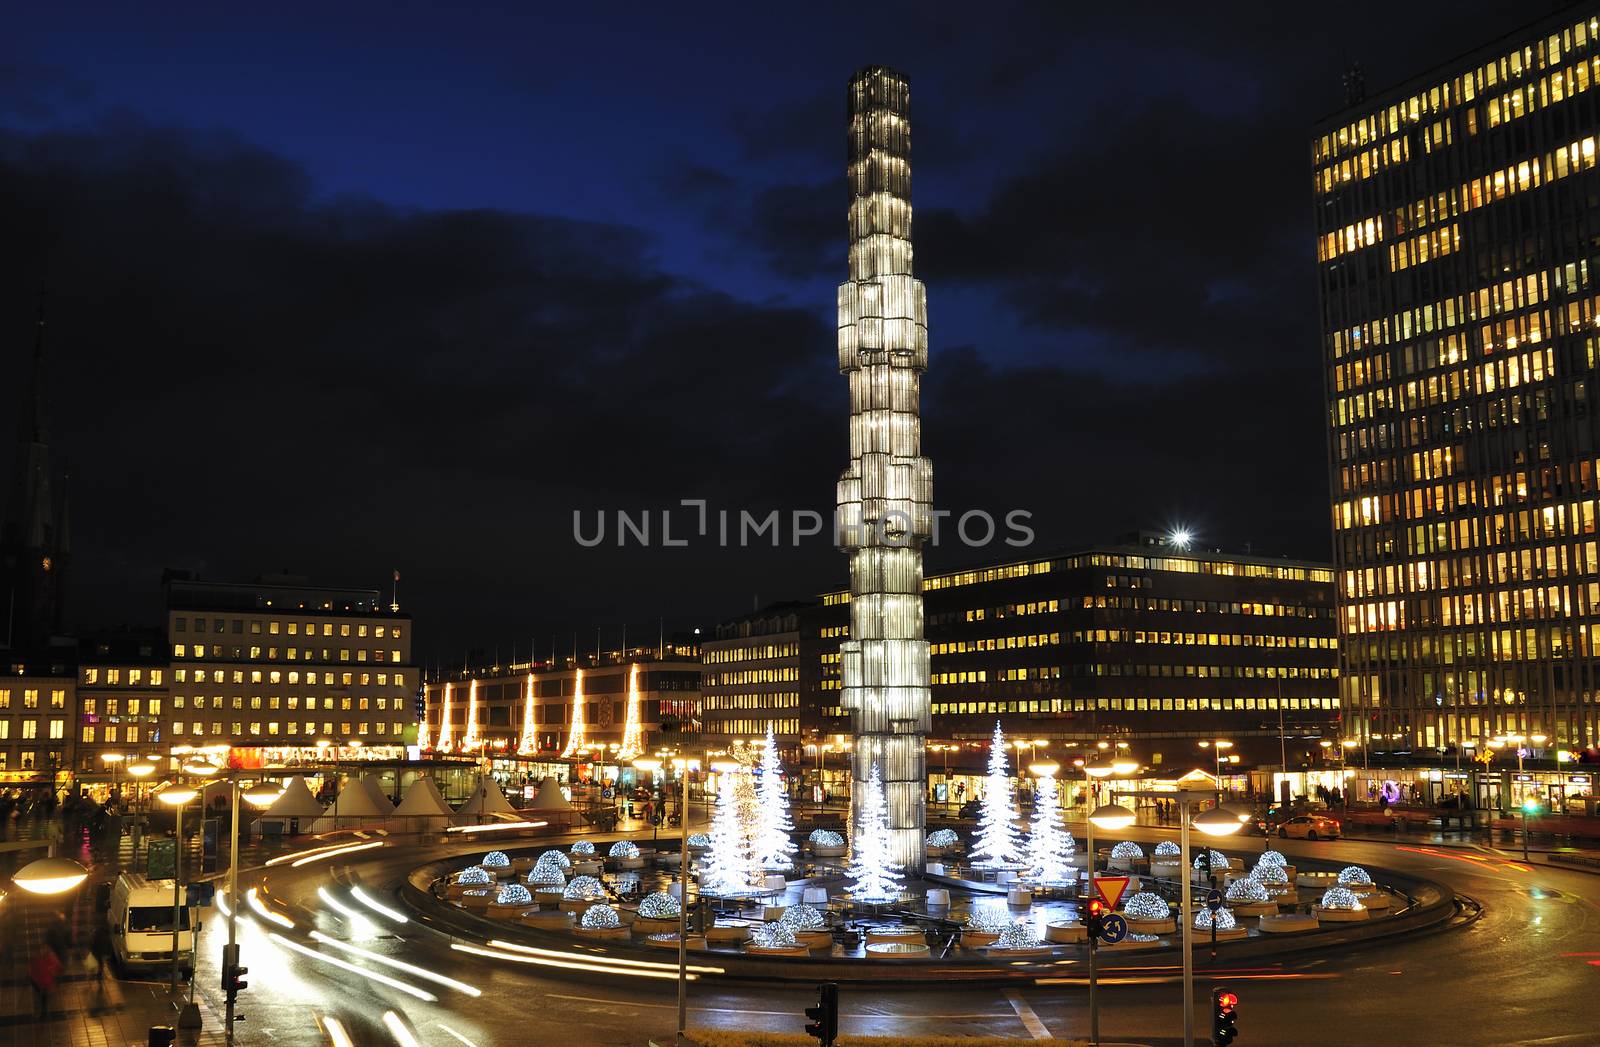 The iconic Kristall obelisk illuminated in the centre of Sergels torg, the modern public square in the heart of Stockholm, overlooking the pedestrianised plaza, traffic roundabout, Kulturhuset, shops and office buildings glowing under the blue dusk sky.